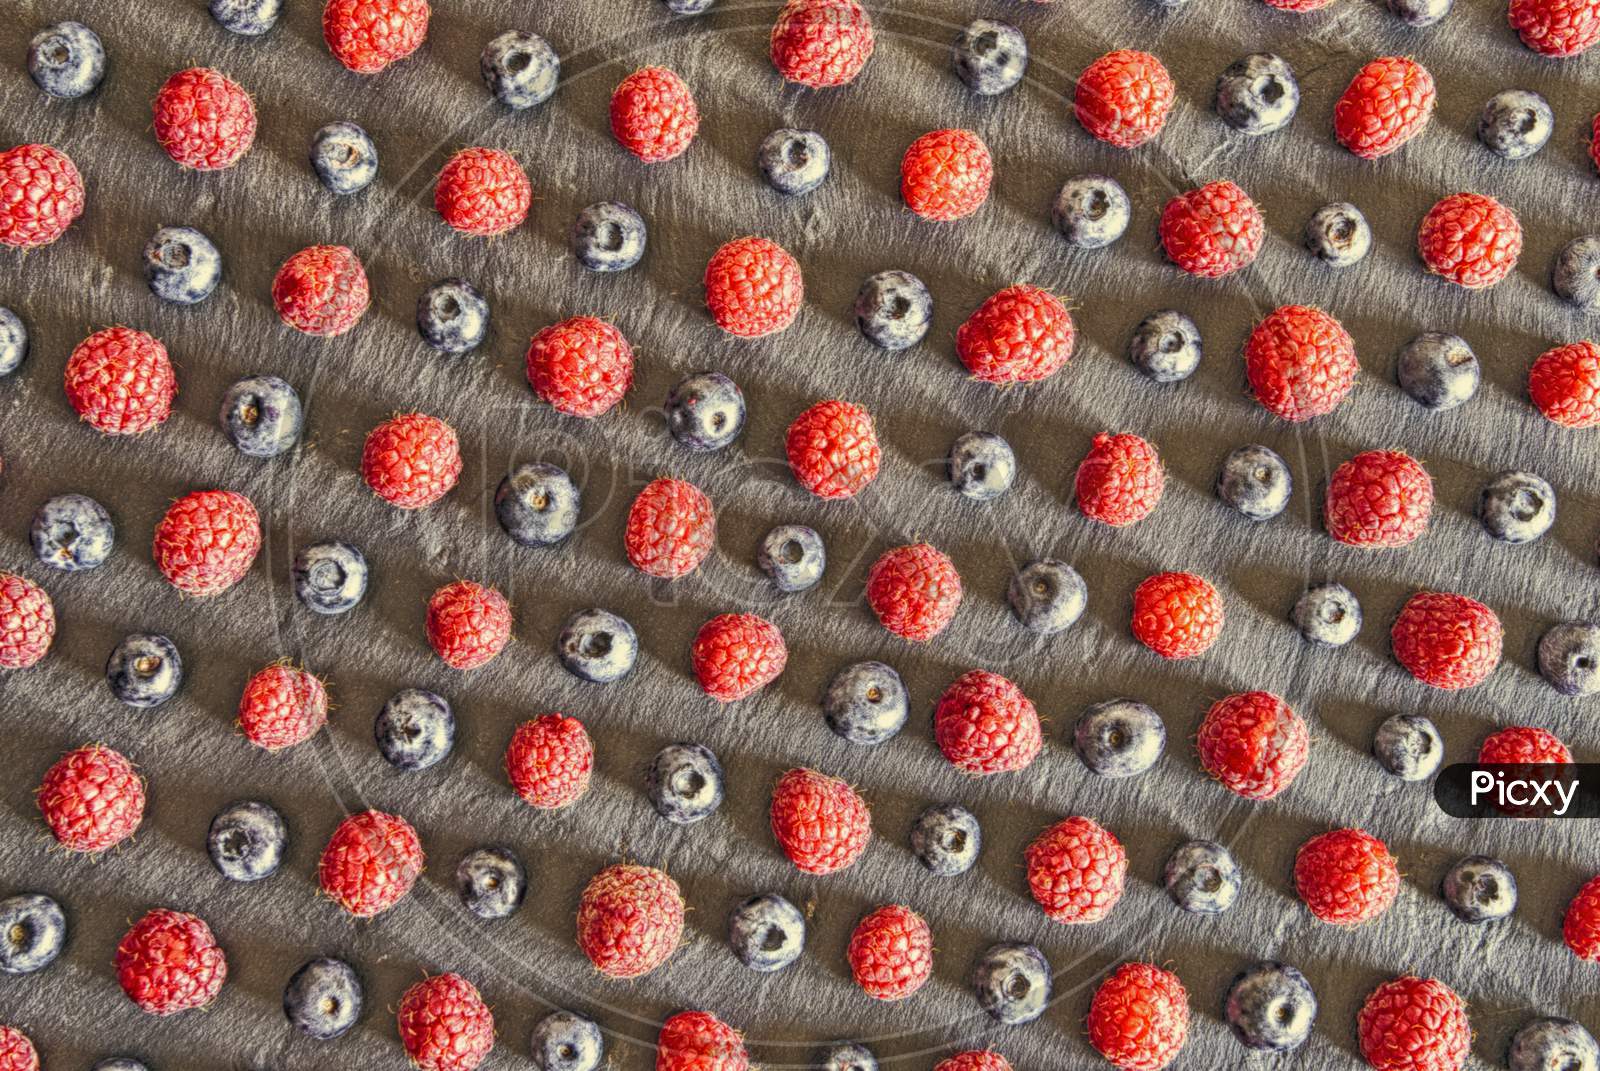 close up of raspberries and blueberries arranged as a pattern